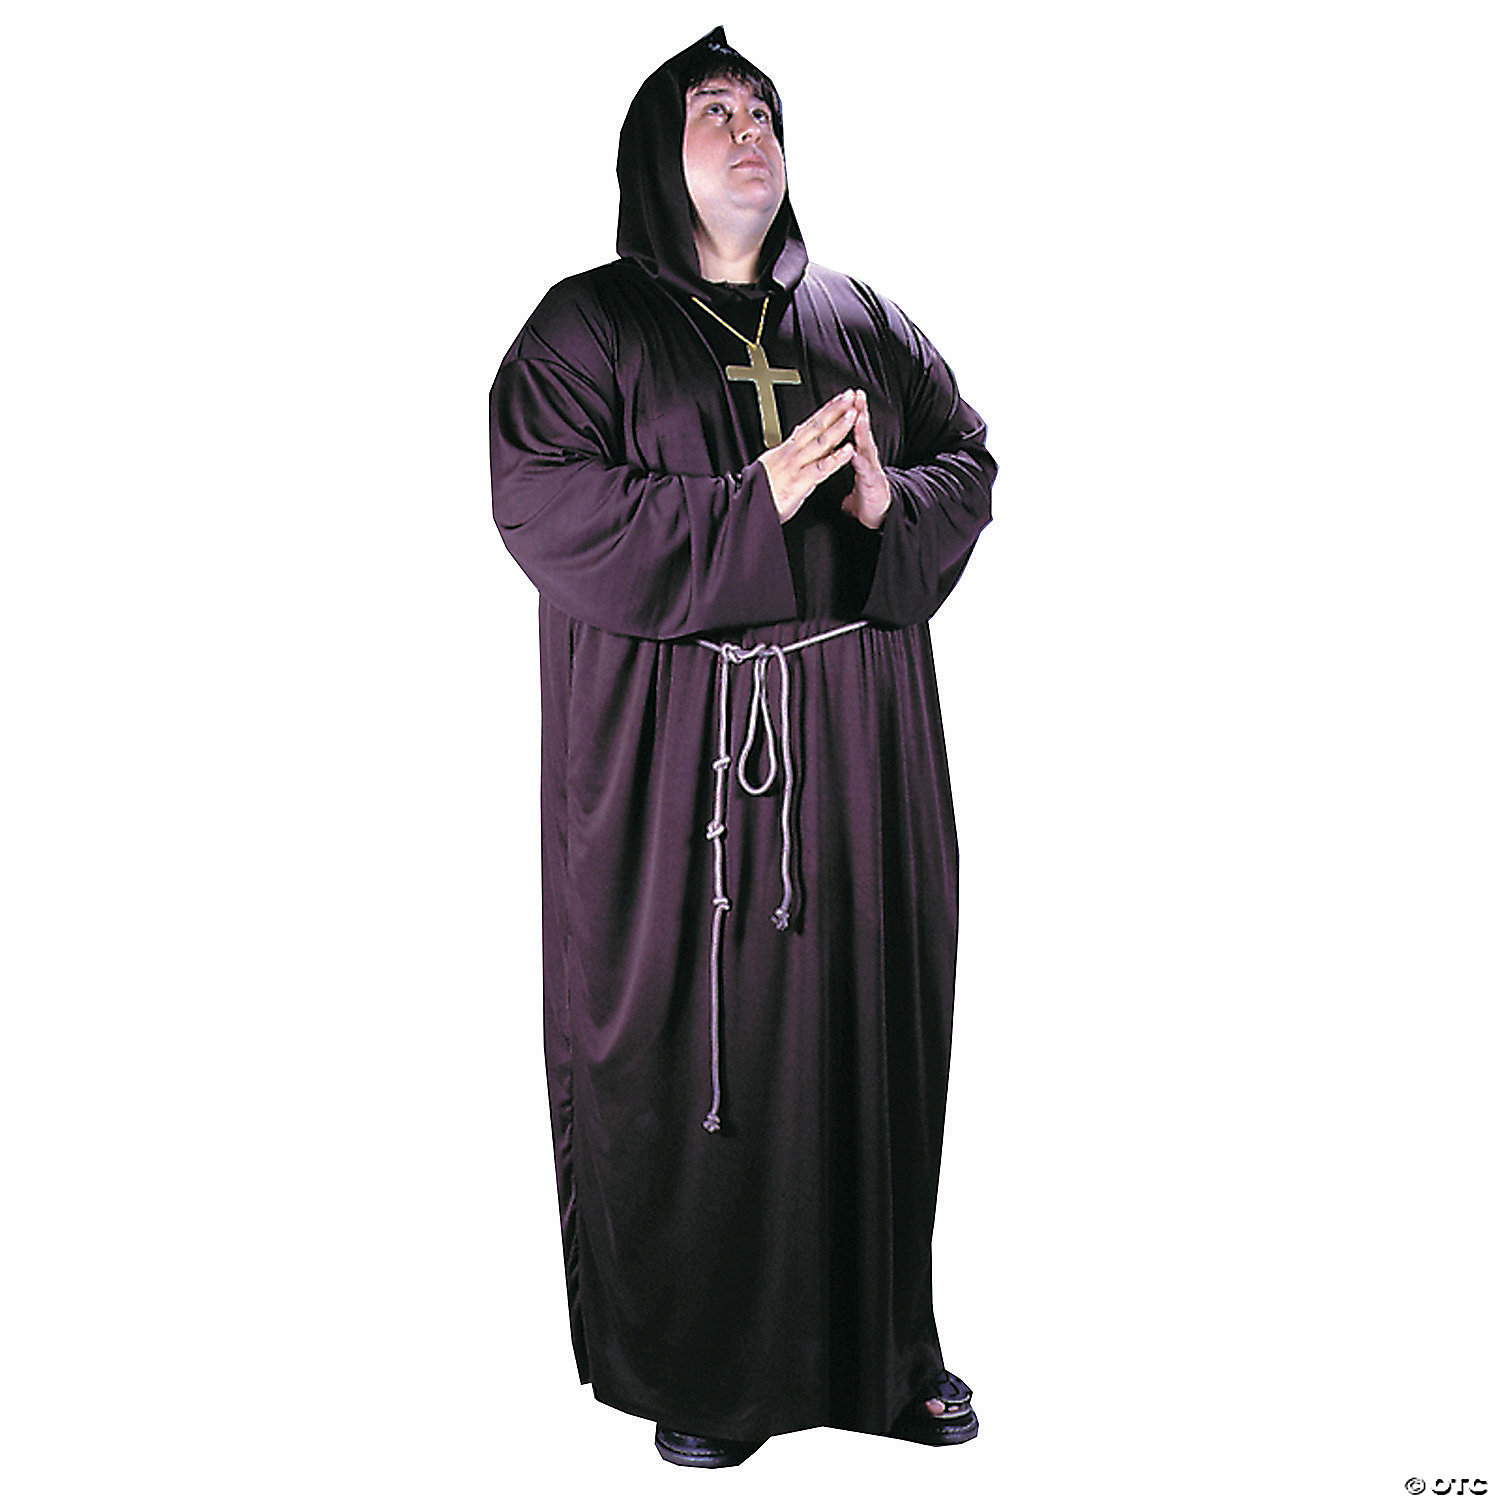 MONK RELIGIOUS MEDIEVAL ROBE WIG ADULT MENS PLUS SIZE DRESS UP HALLOWEEN COSTUME